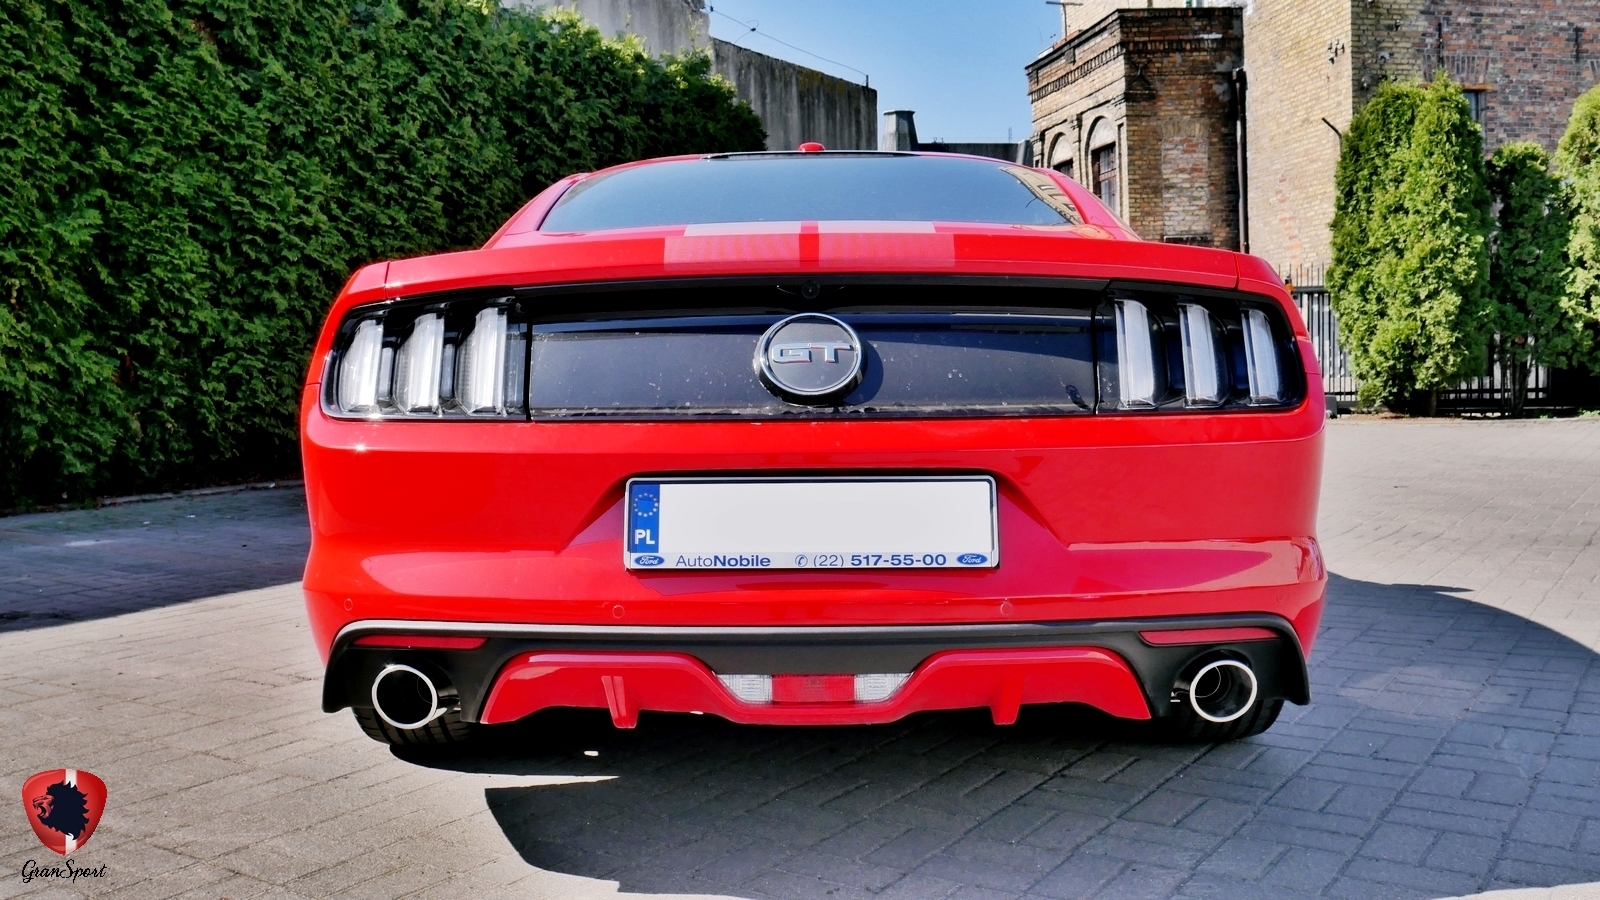 Ford Mustang GT 5.0 V8 Remus